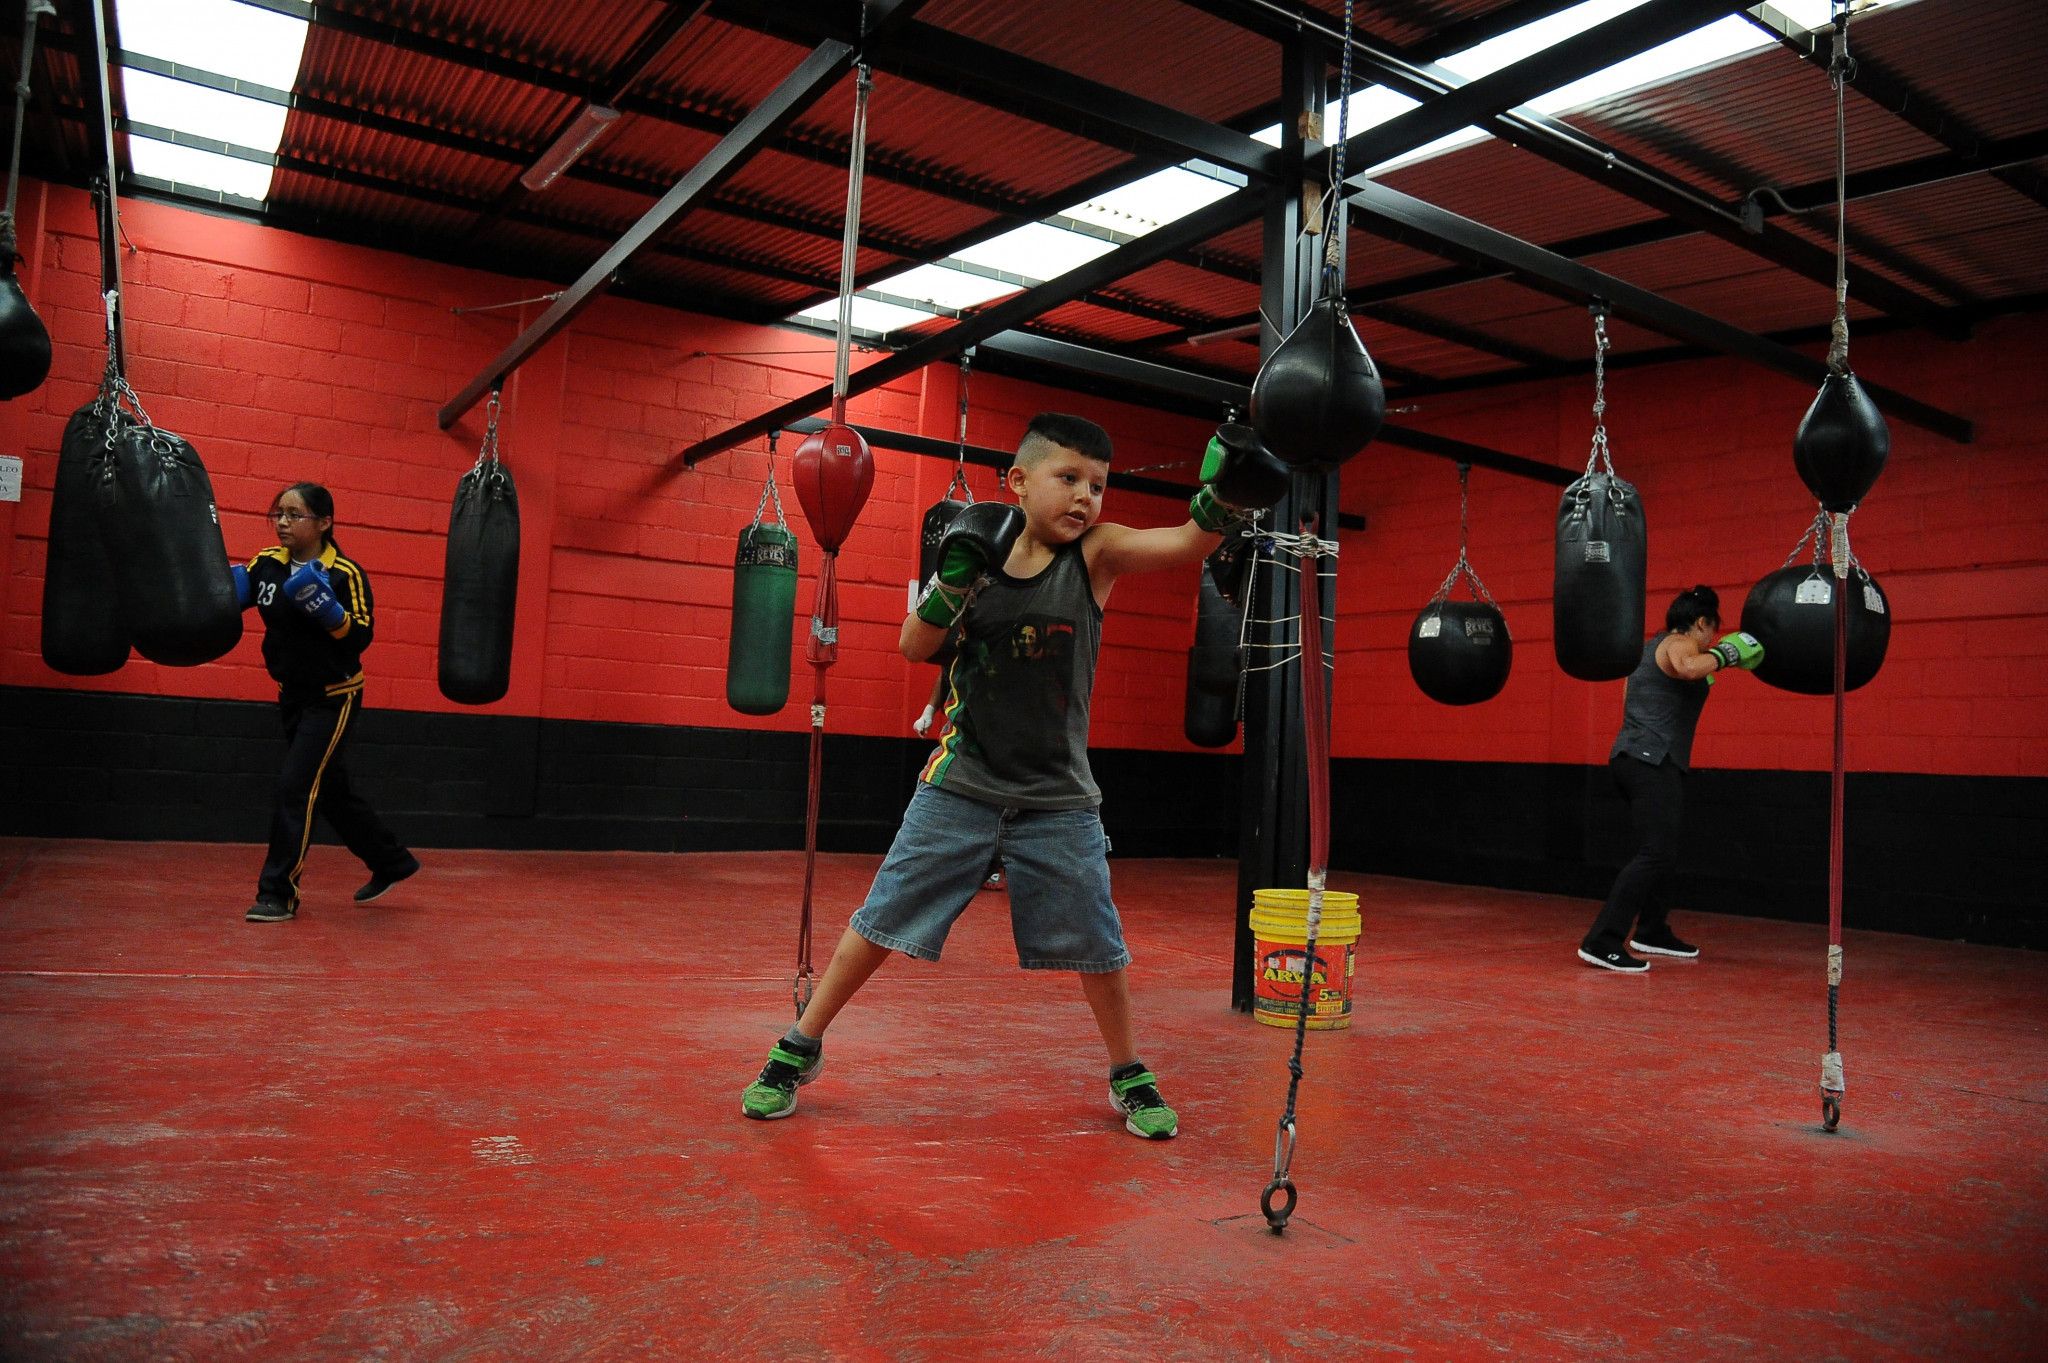 Boxing gyms can remove youngsters from dangerous situations on the streets  ©Getty Images